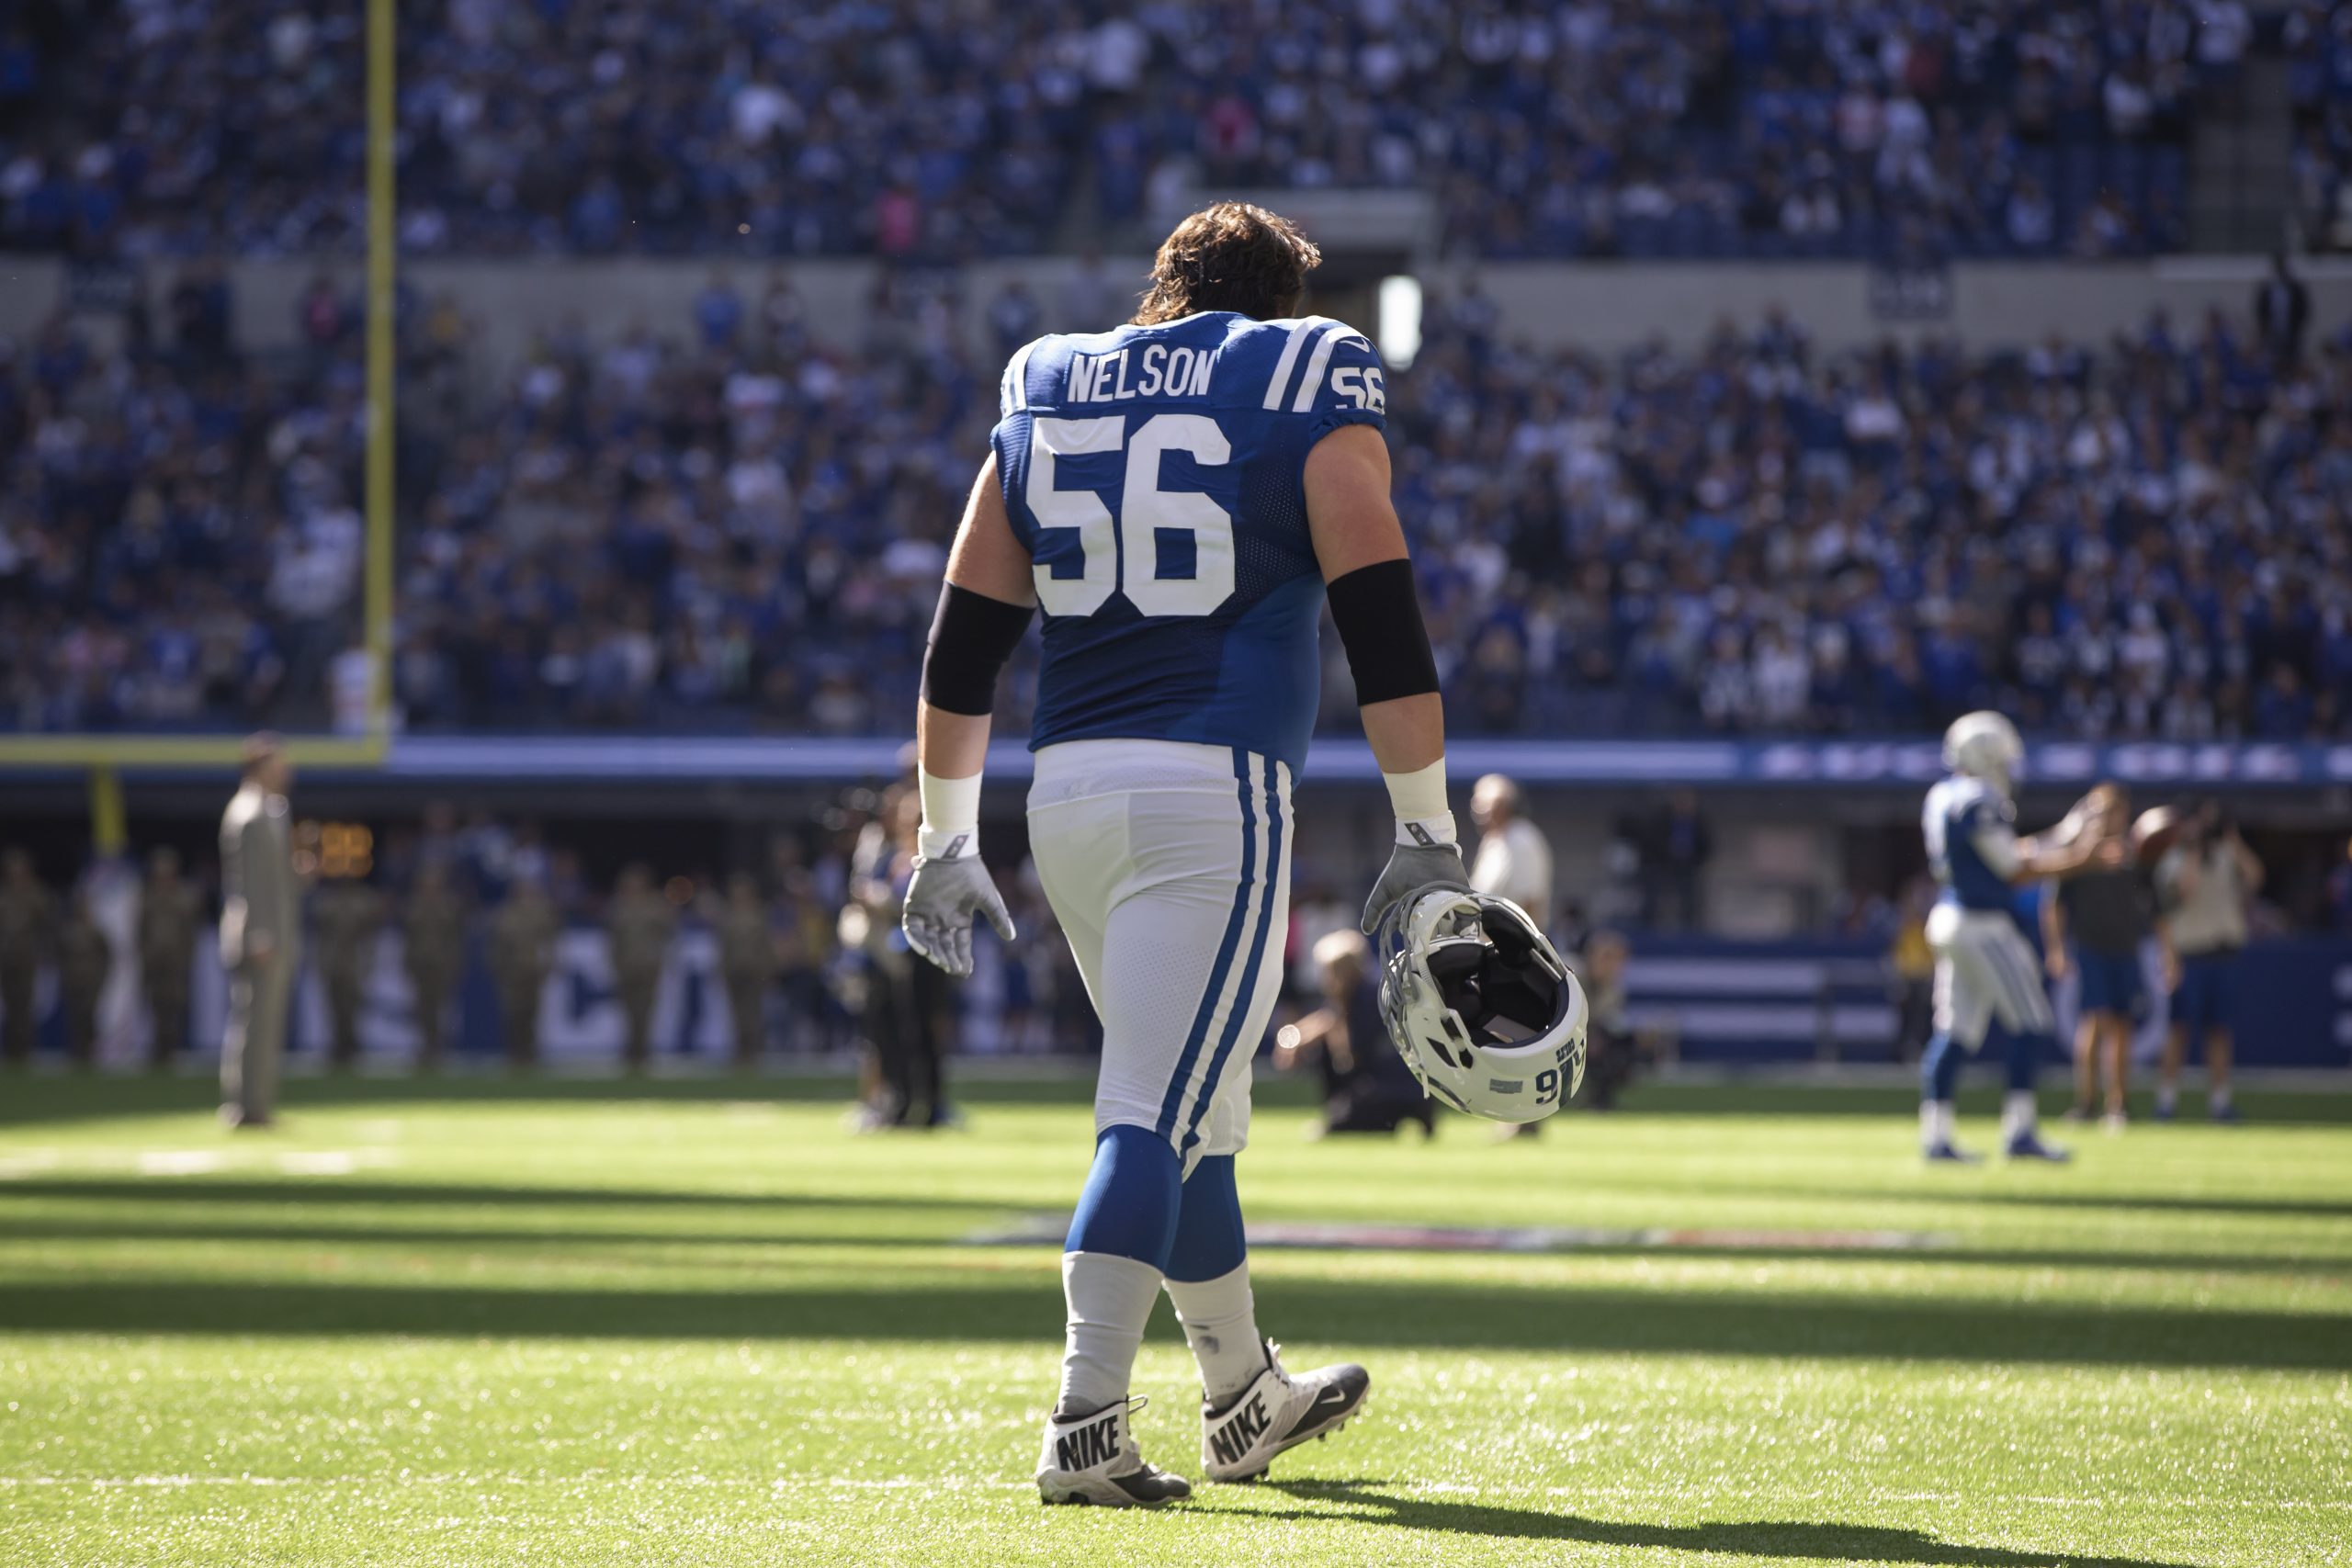 Quenton Nelson’s Brutal Injury Confirms the Colts are the NFL’s Most Cursed Franchise